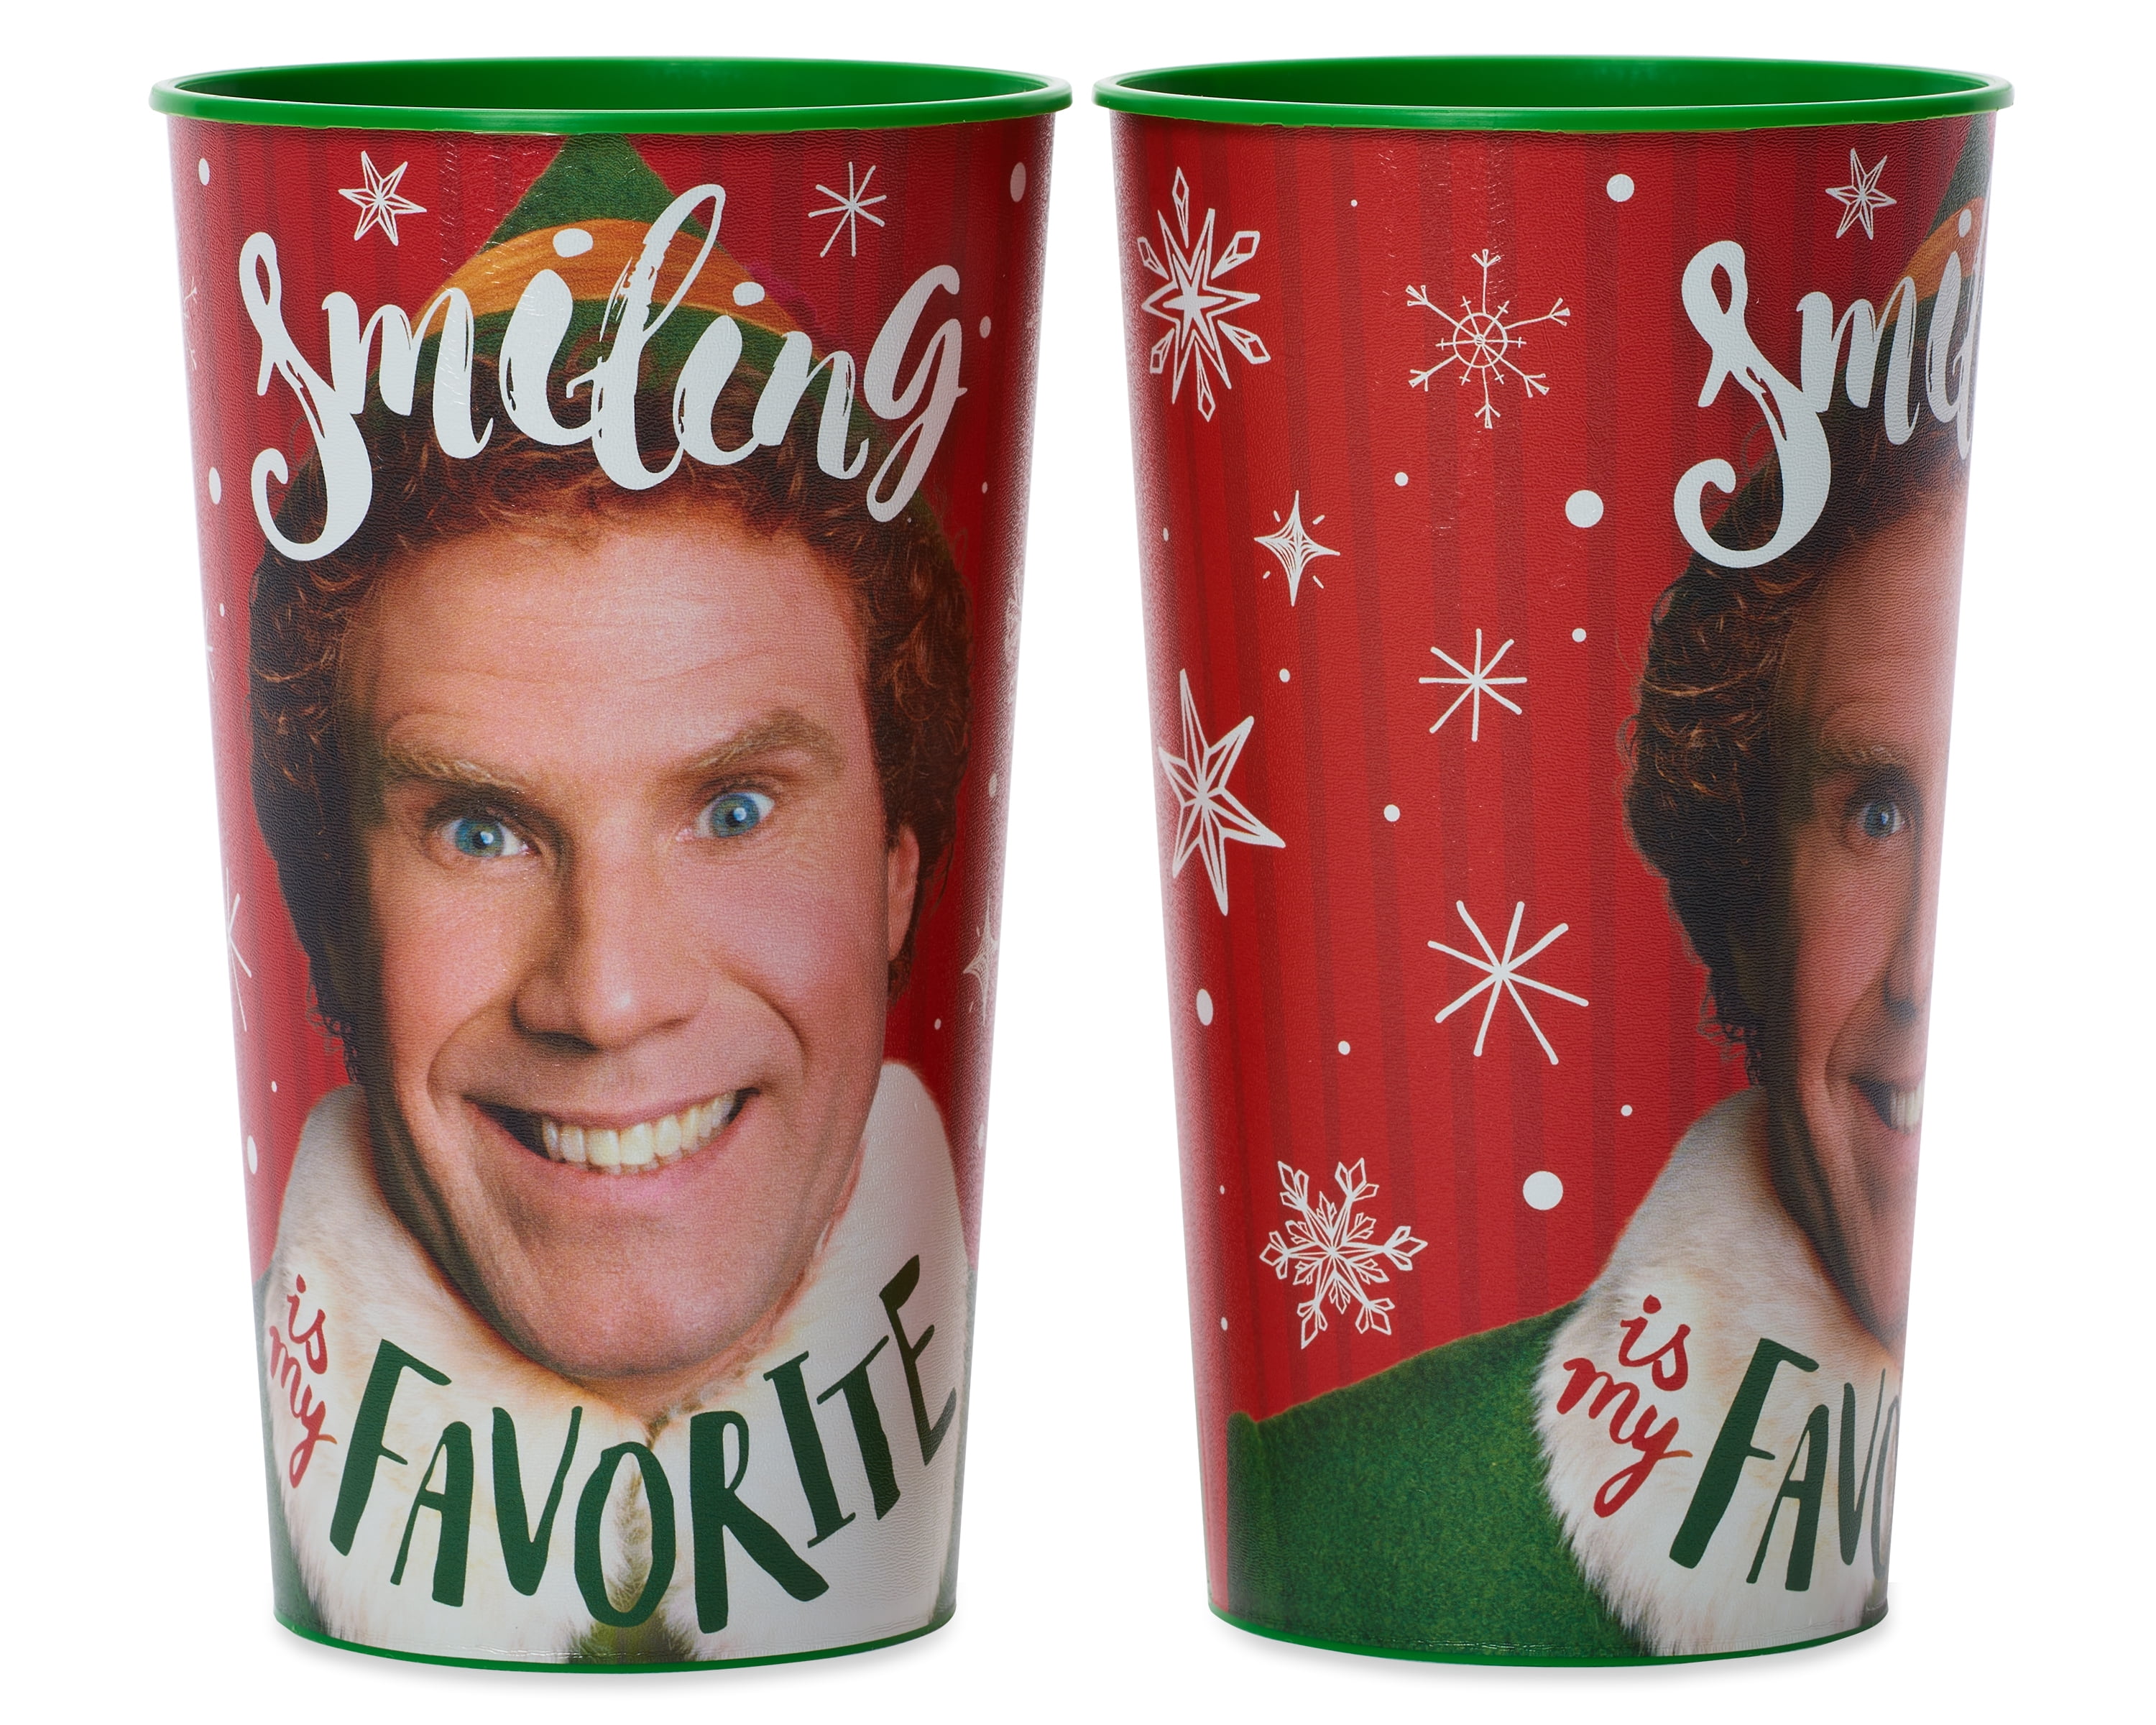 Buddy the Elf New Line Production White Green Elf Cup He's an